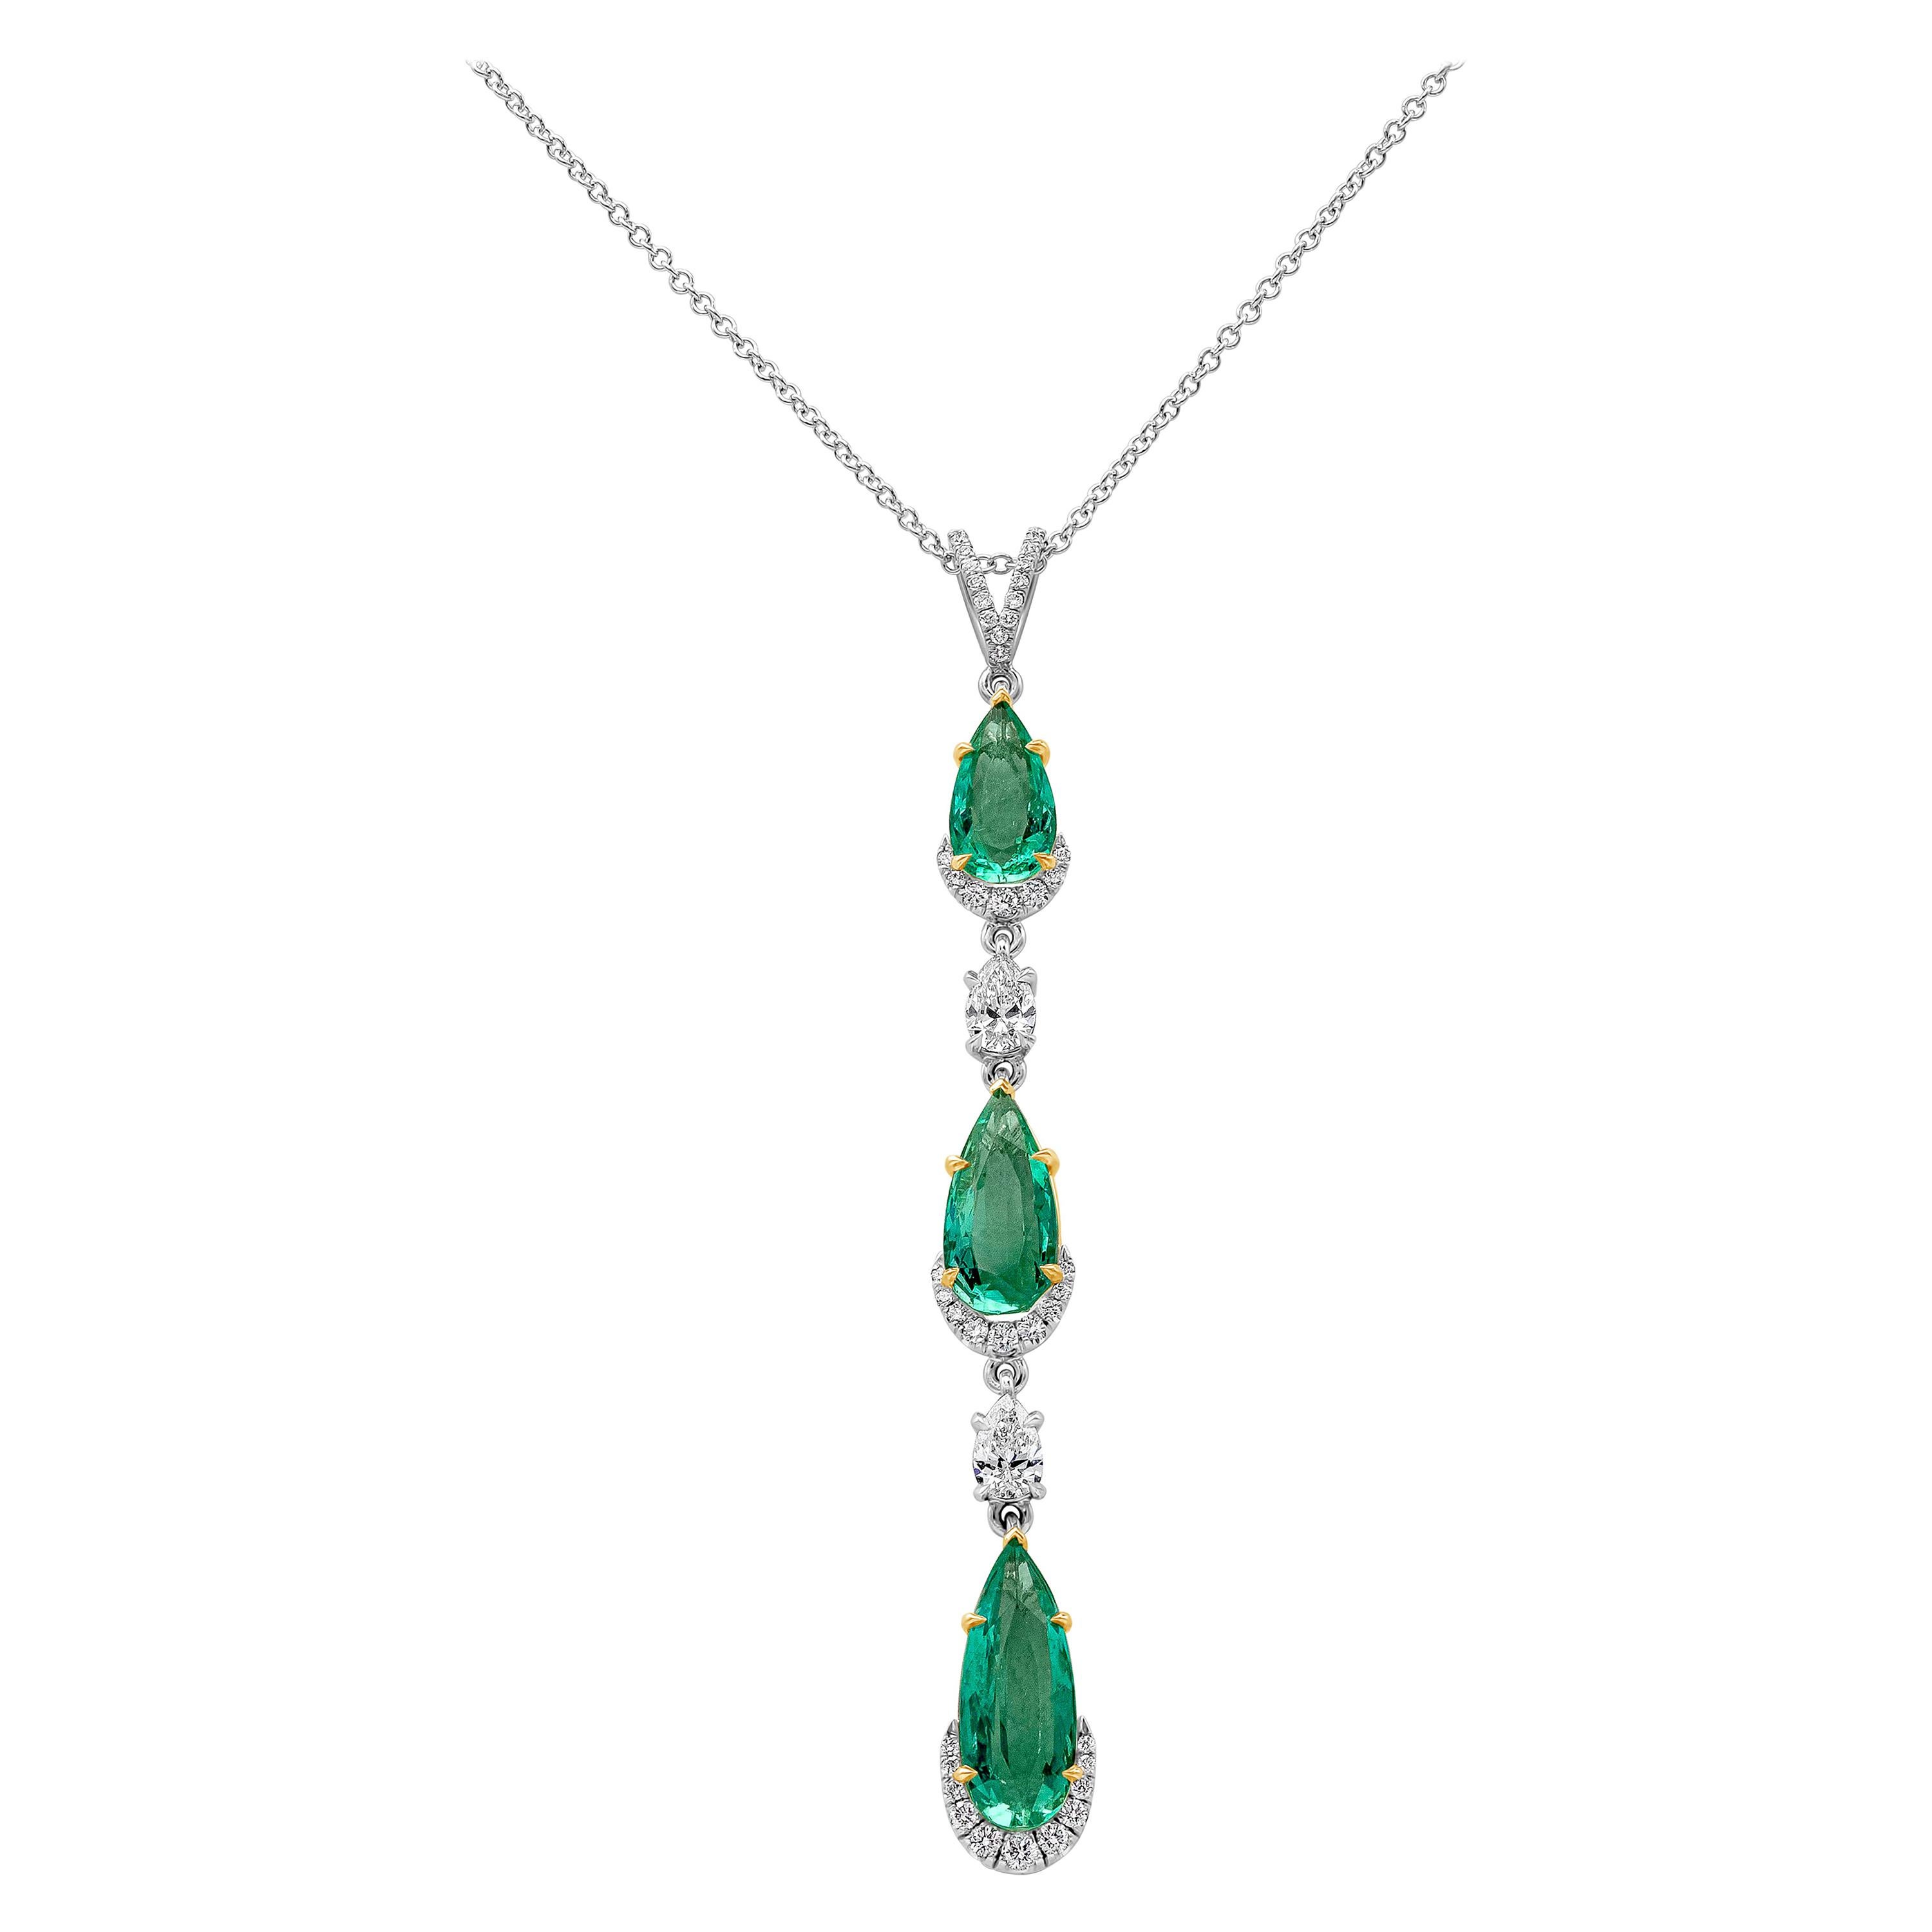 6.31 Carats Total Pear Shape Colombian Emerald and Diamond Drop Pendant Necklace